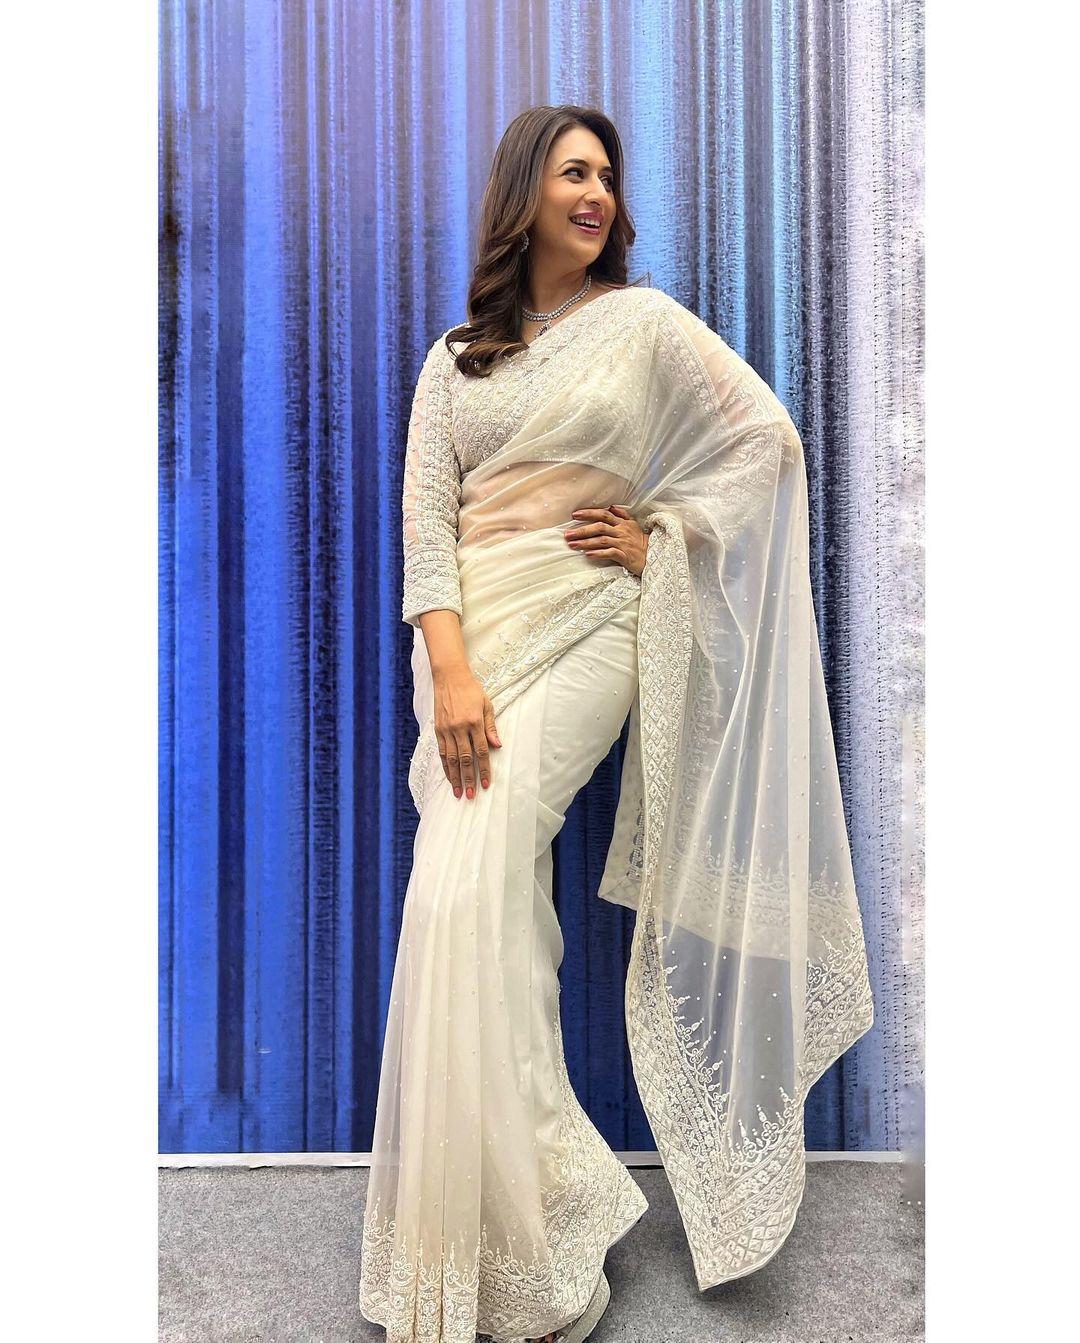 The actress left her hair open in loose curls, and Divyanka's saree featured stylish embroidery on the borders